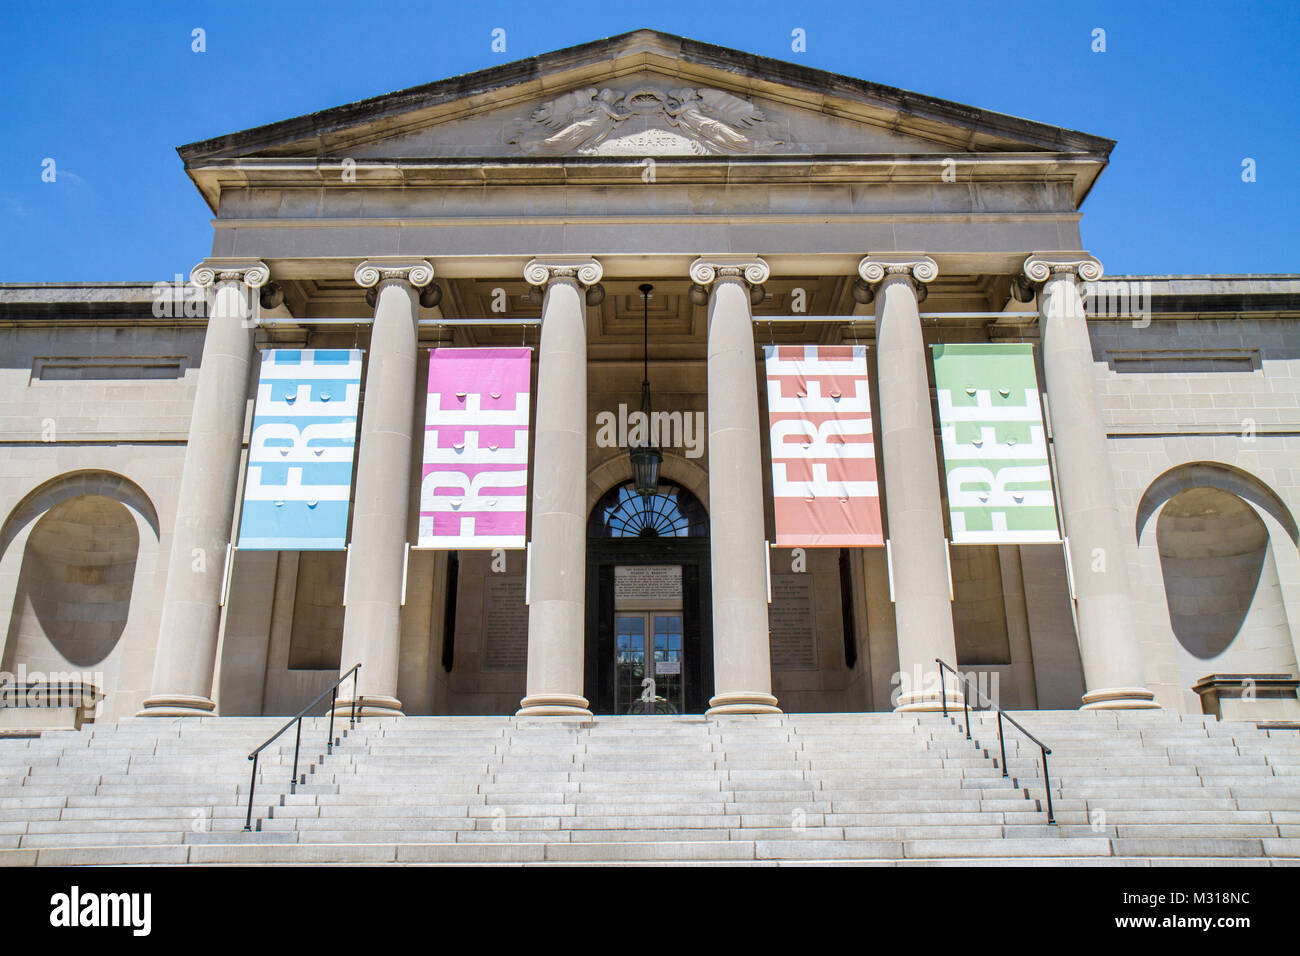 Baltimore Maryland,Wyman Park,Baltimore Museum of Art,Neoclassical architecture,banner,free admission,entrance,front,steps stairs staircase,column,ion Stock Photo